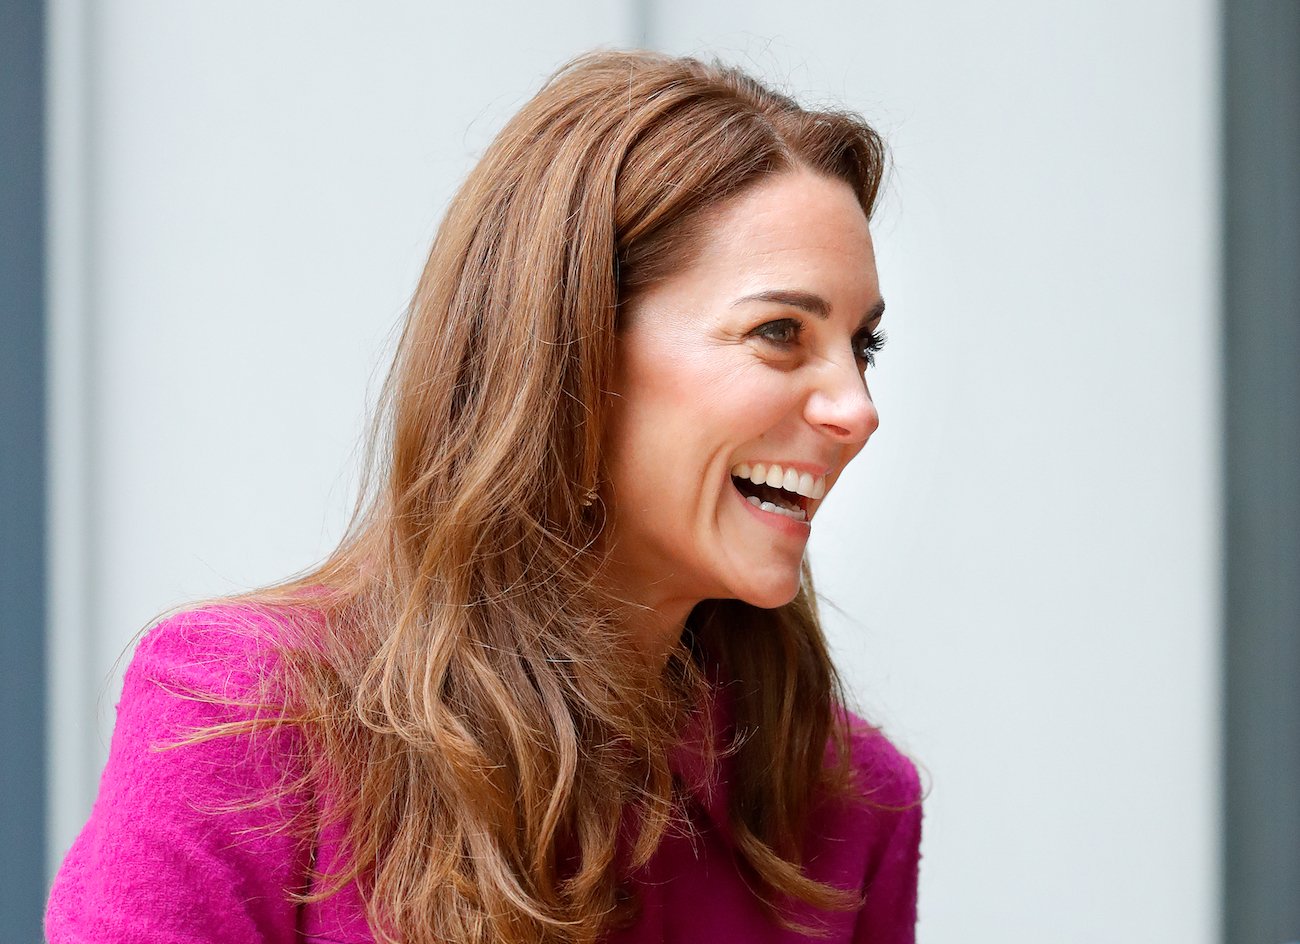 Kate Middleton laughing, looking to the side